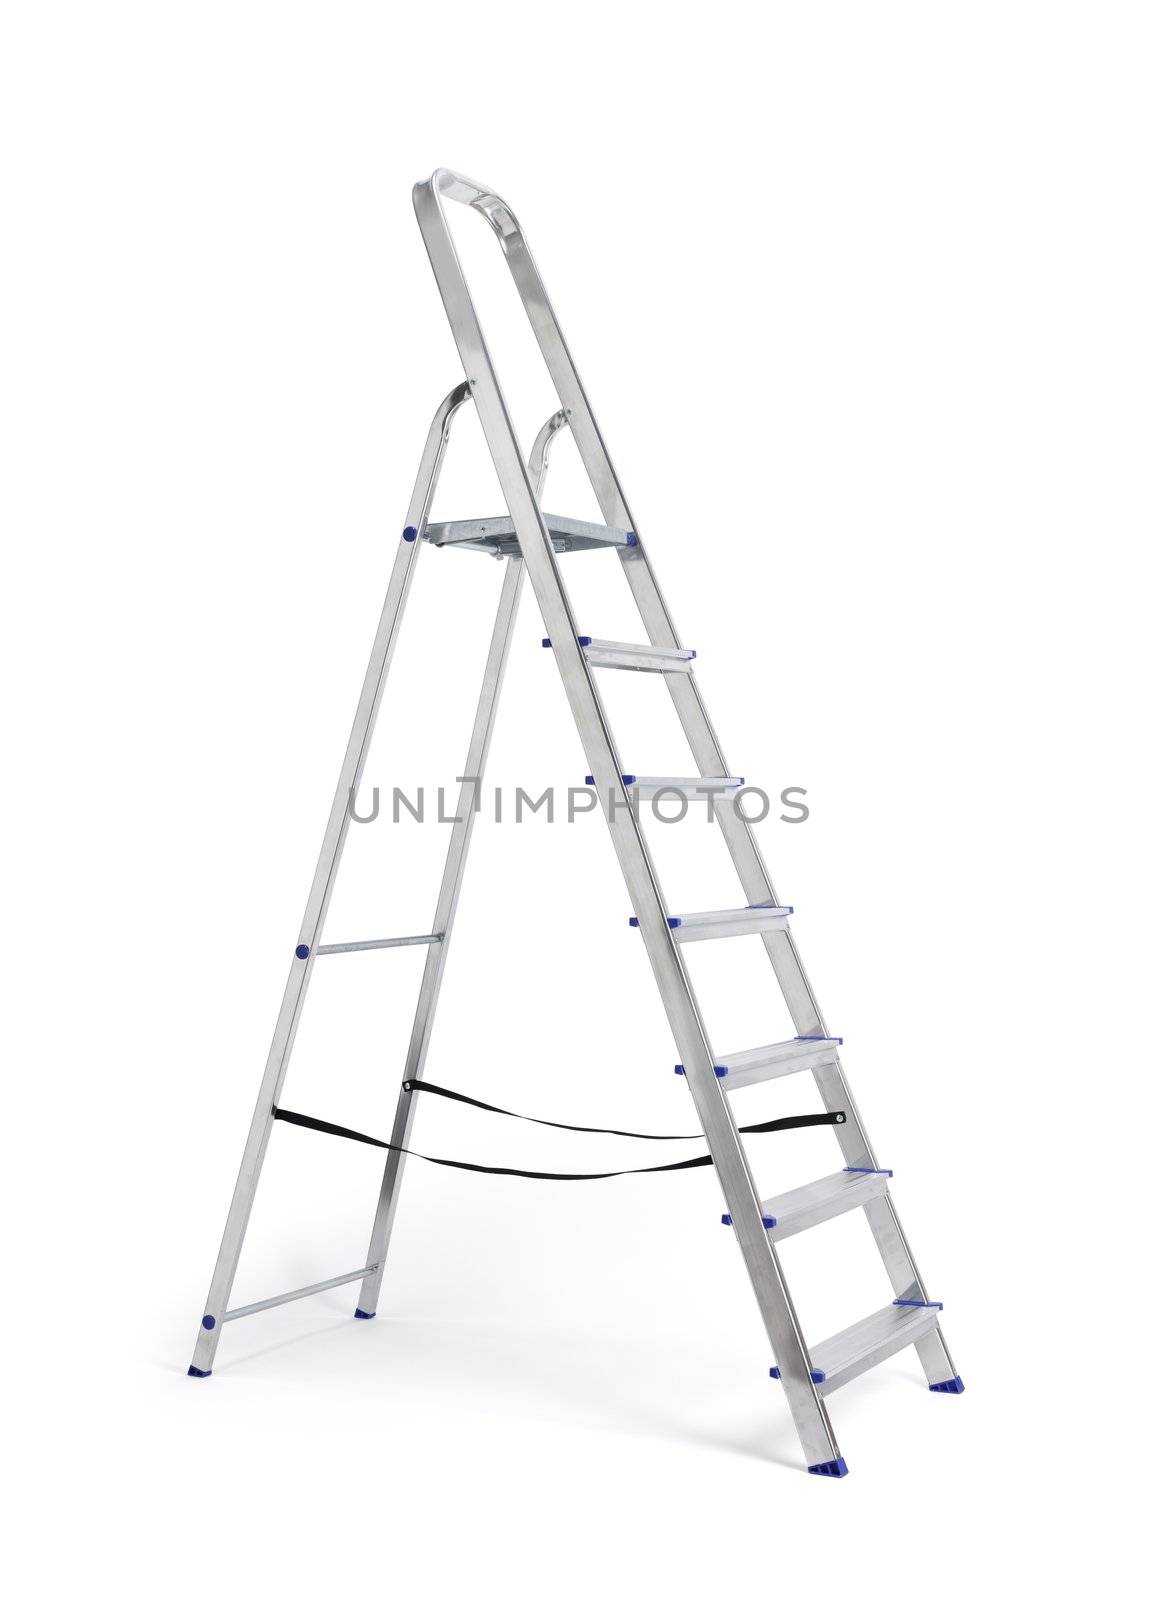 A new metallic step ladder isolated on white with natural shadows.